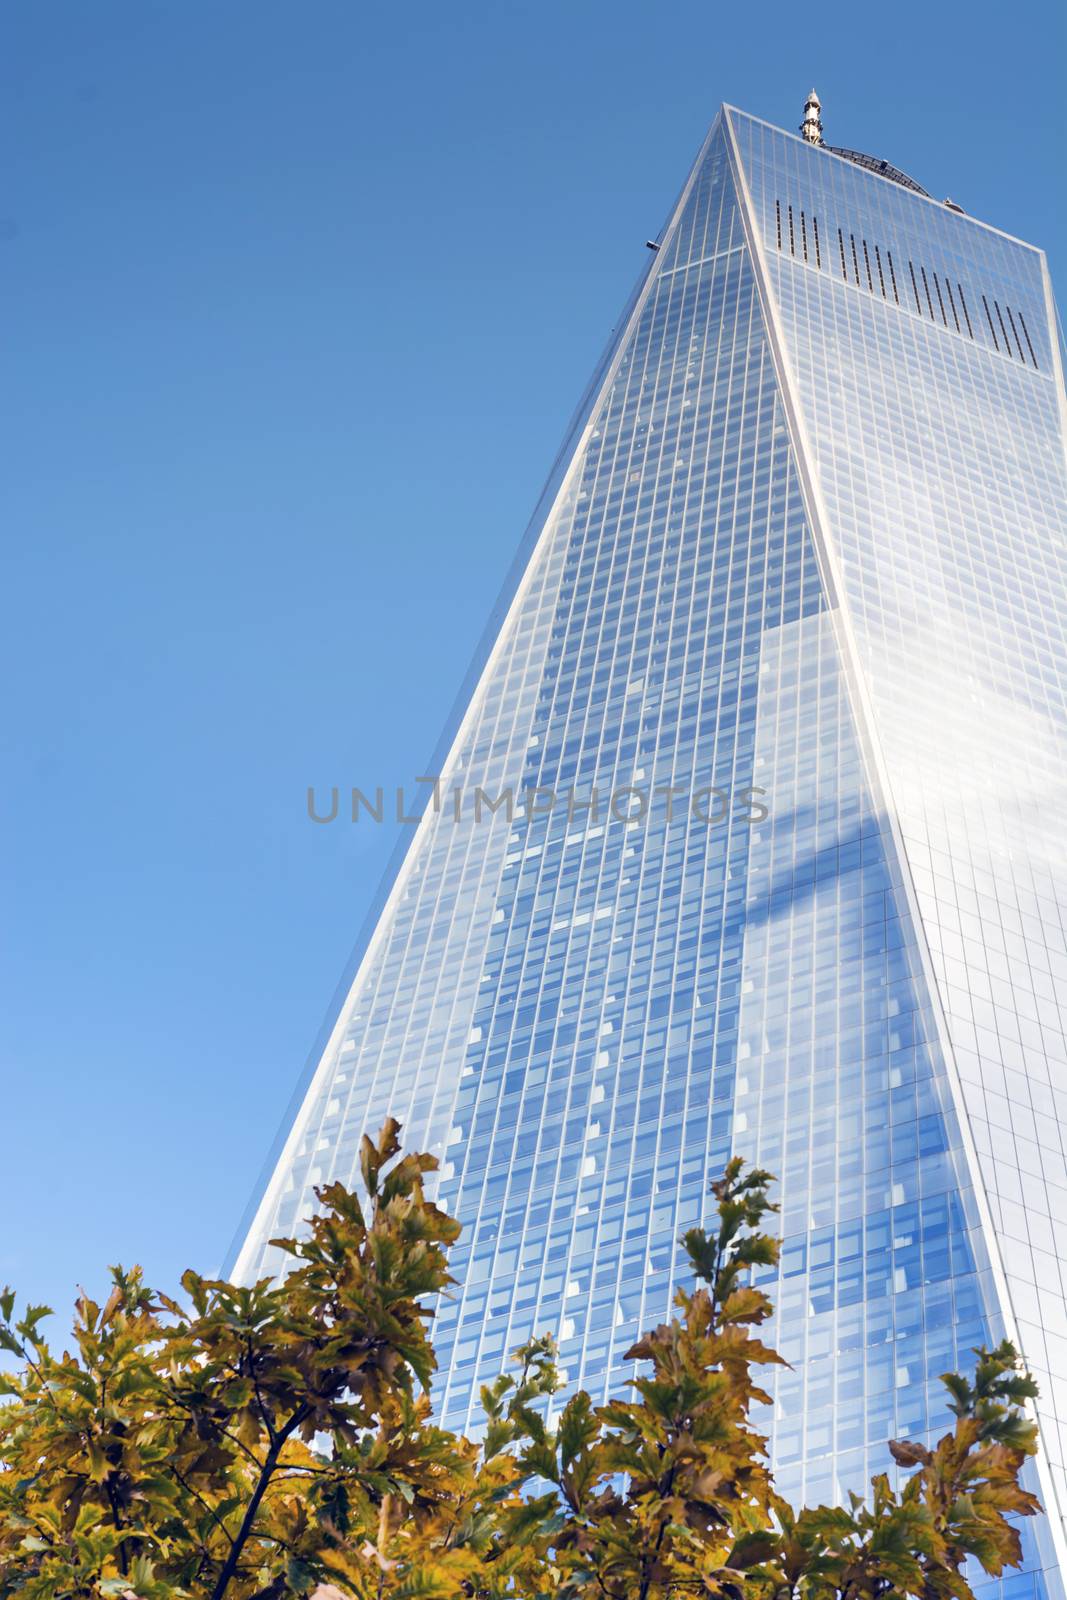 Freedom Tower 1 WTC in Manhattan. One World Trade Center is the tallest building in the Western Hemisphere and the third-tallest building in the world.